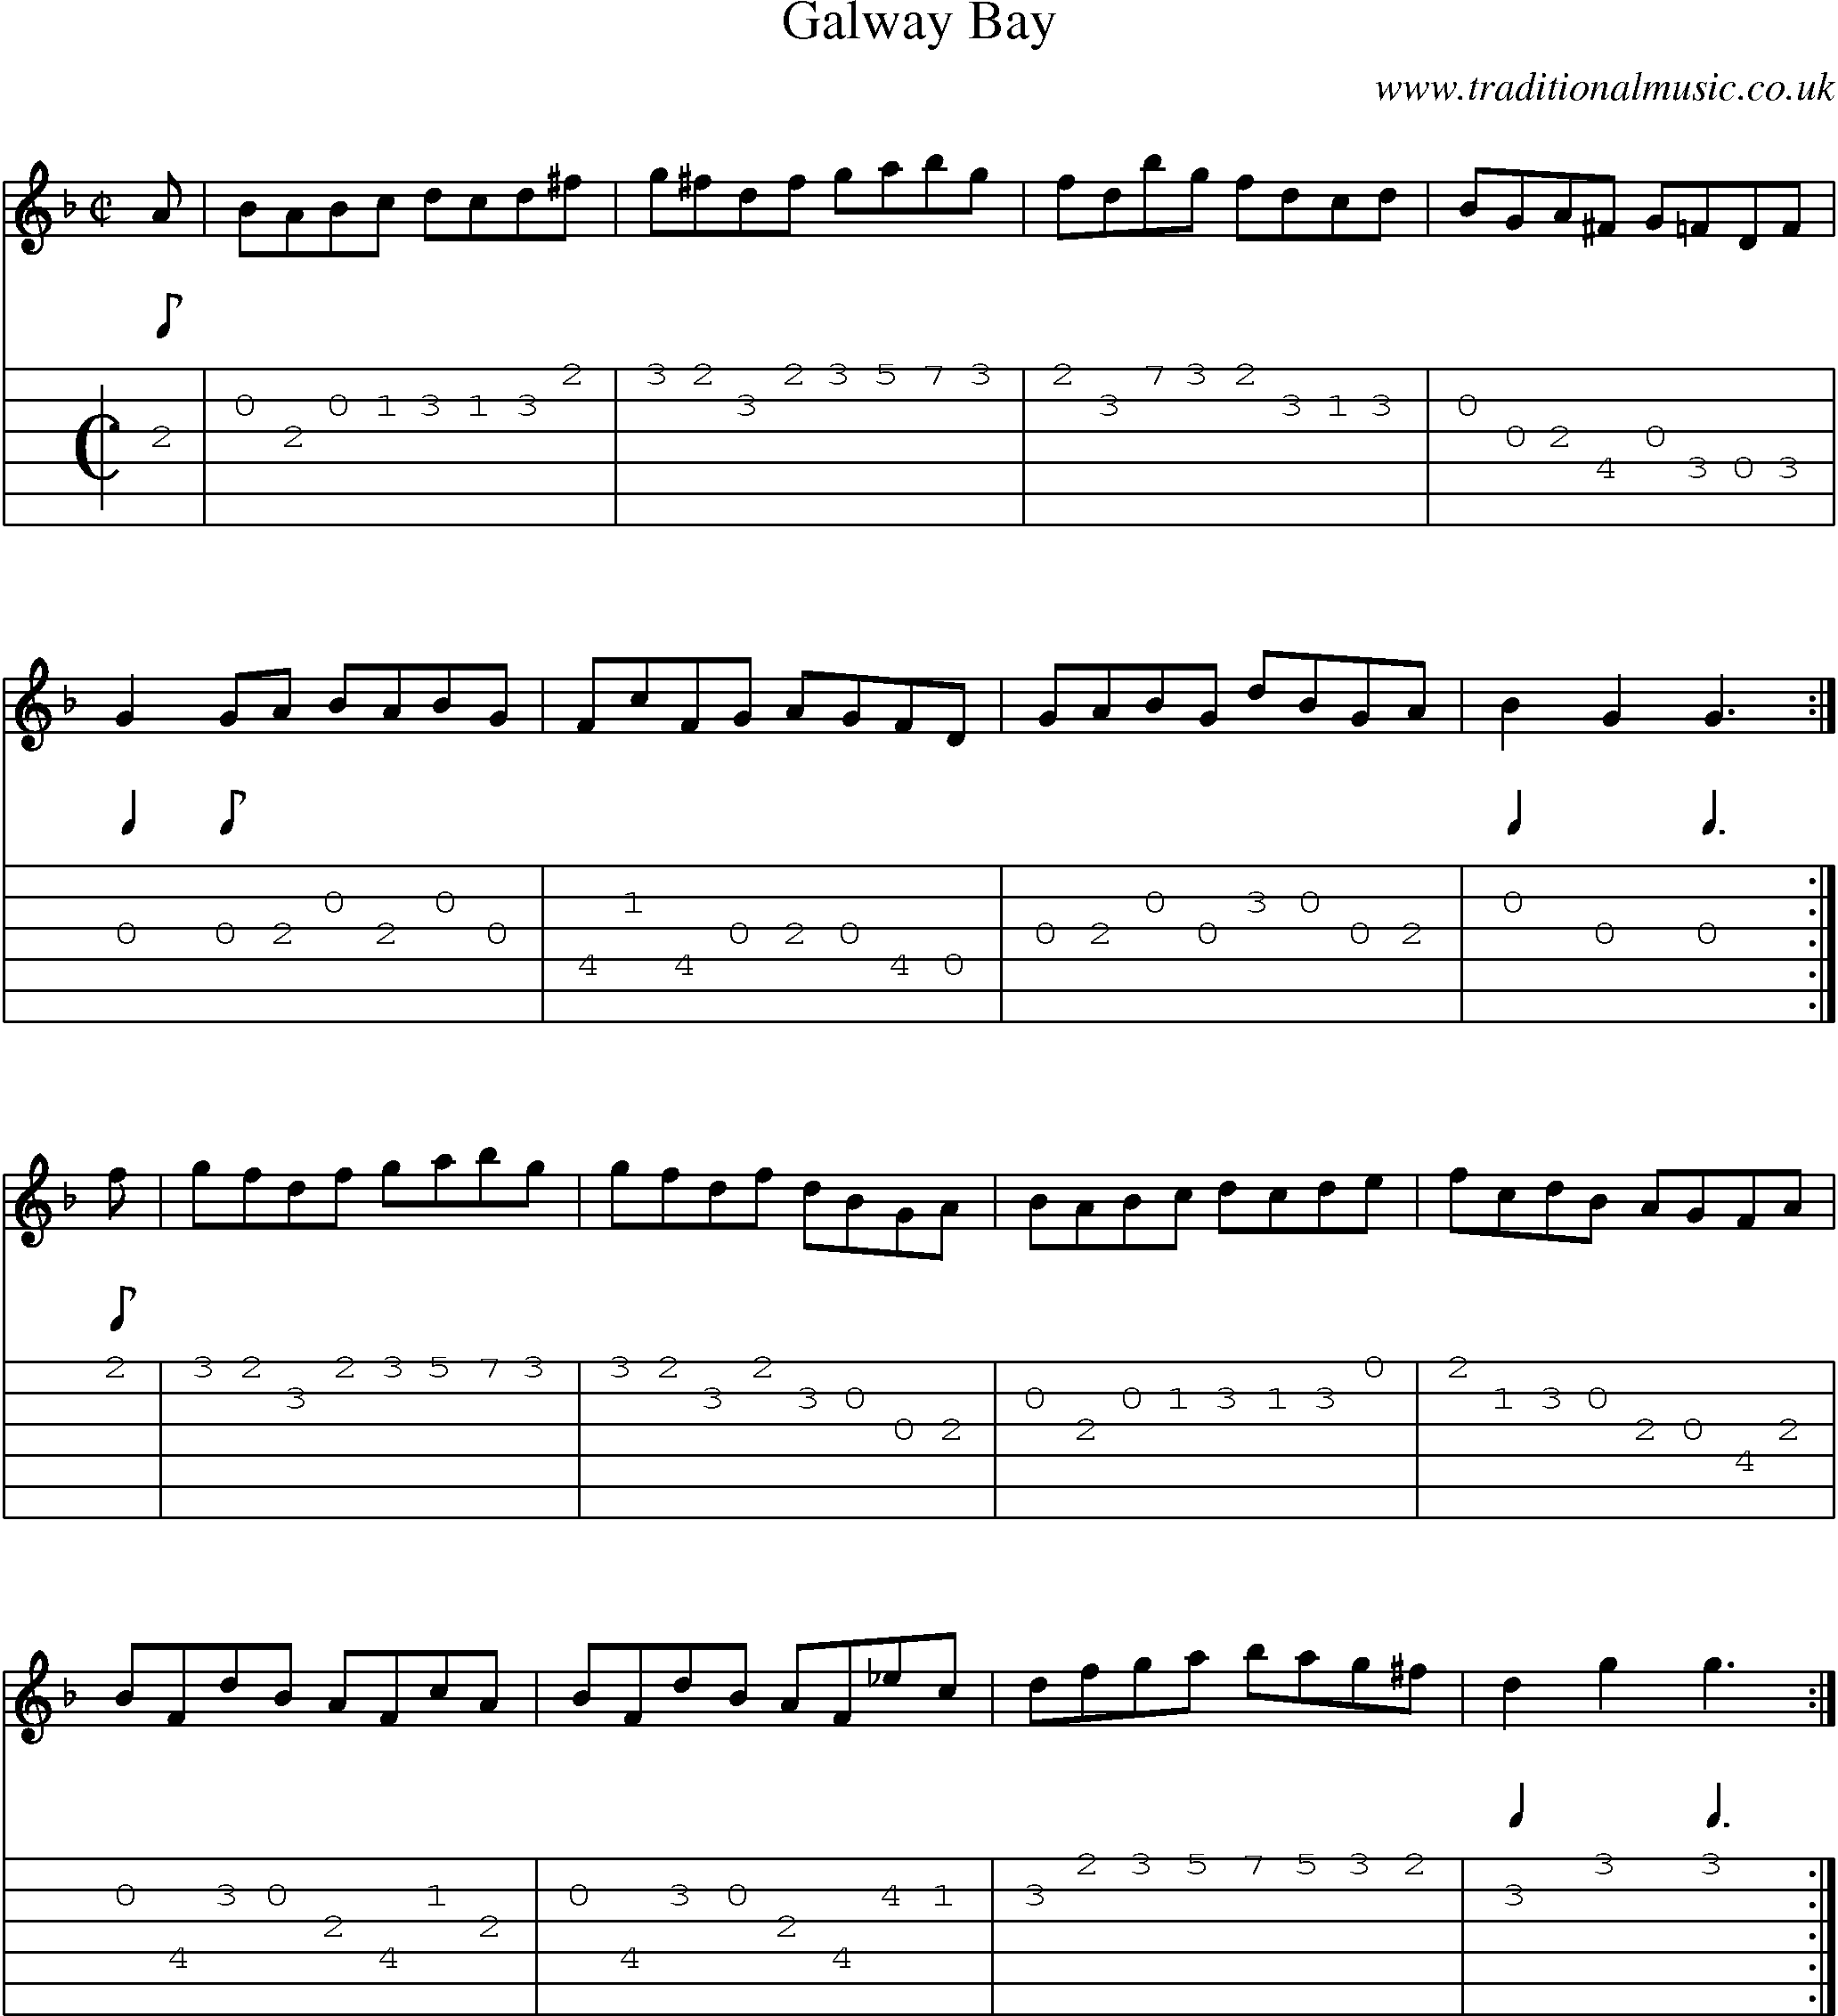 Music Score and Guitar Tabs for Galway Bay